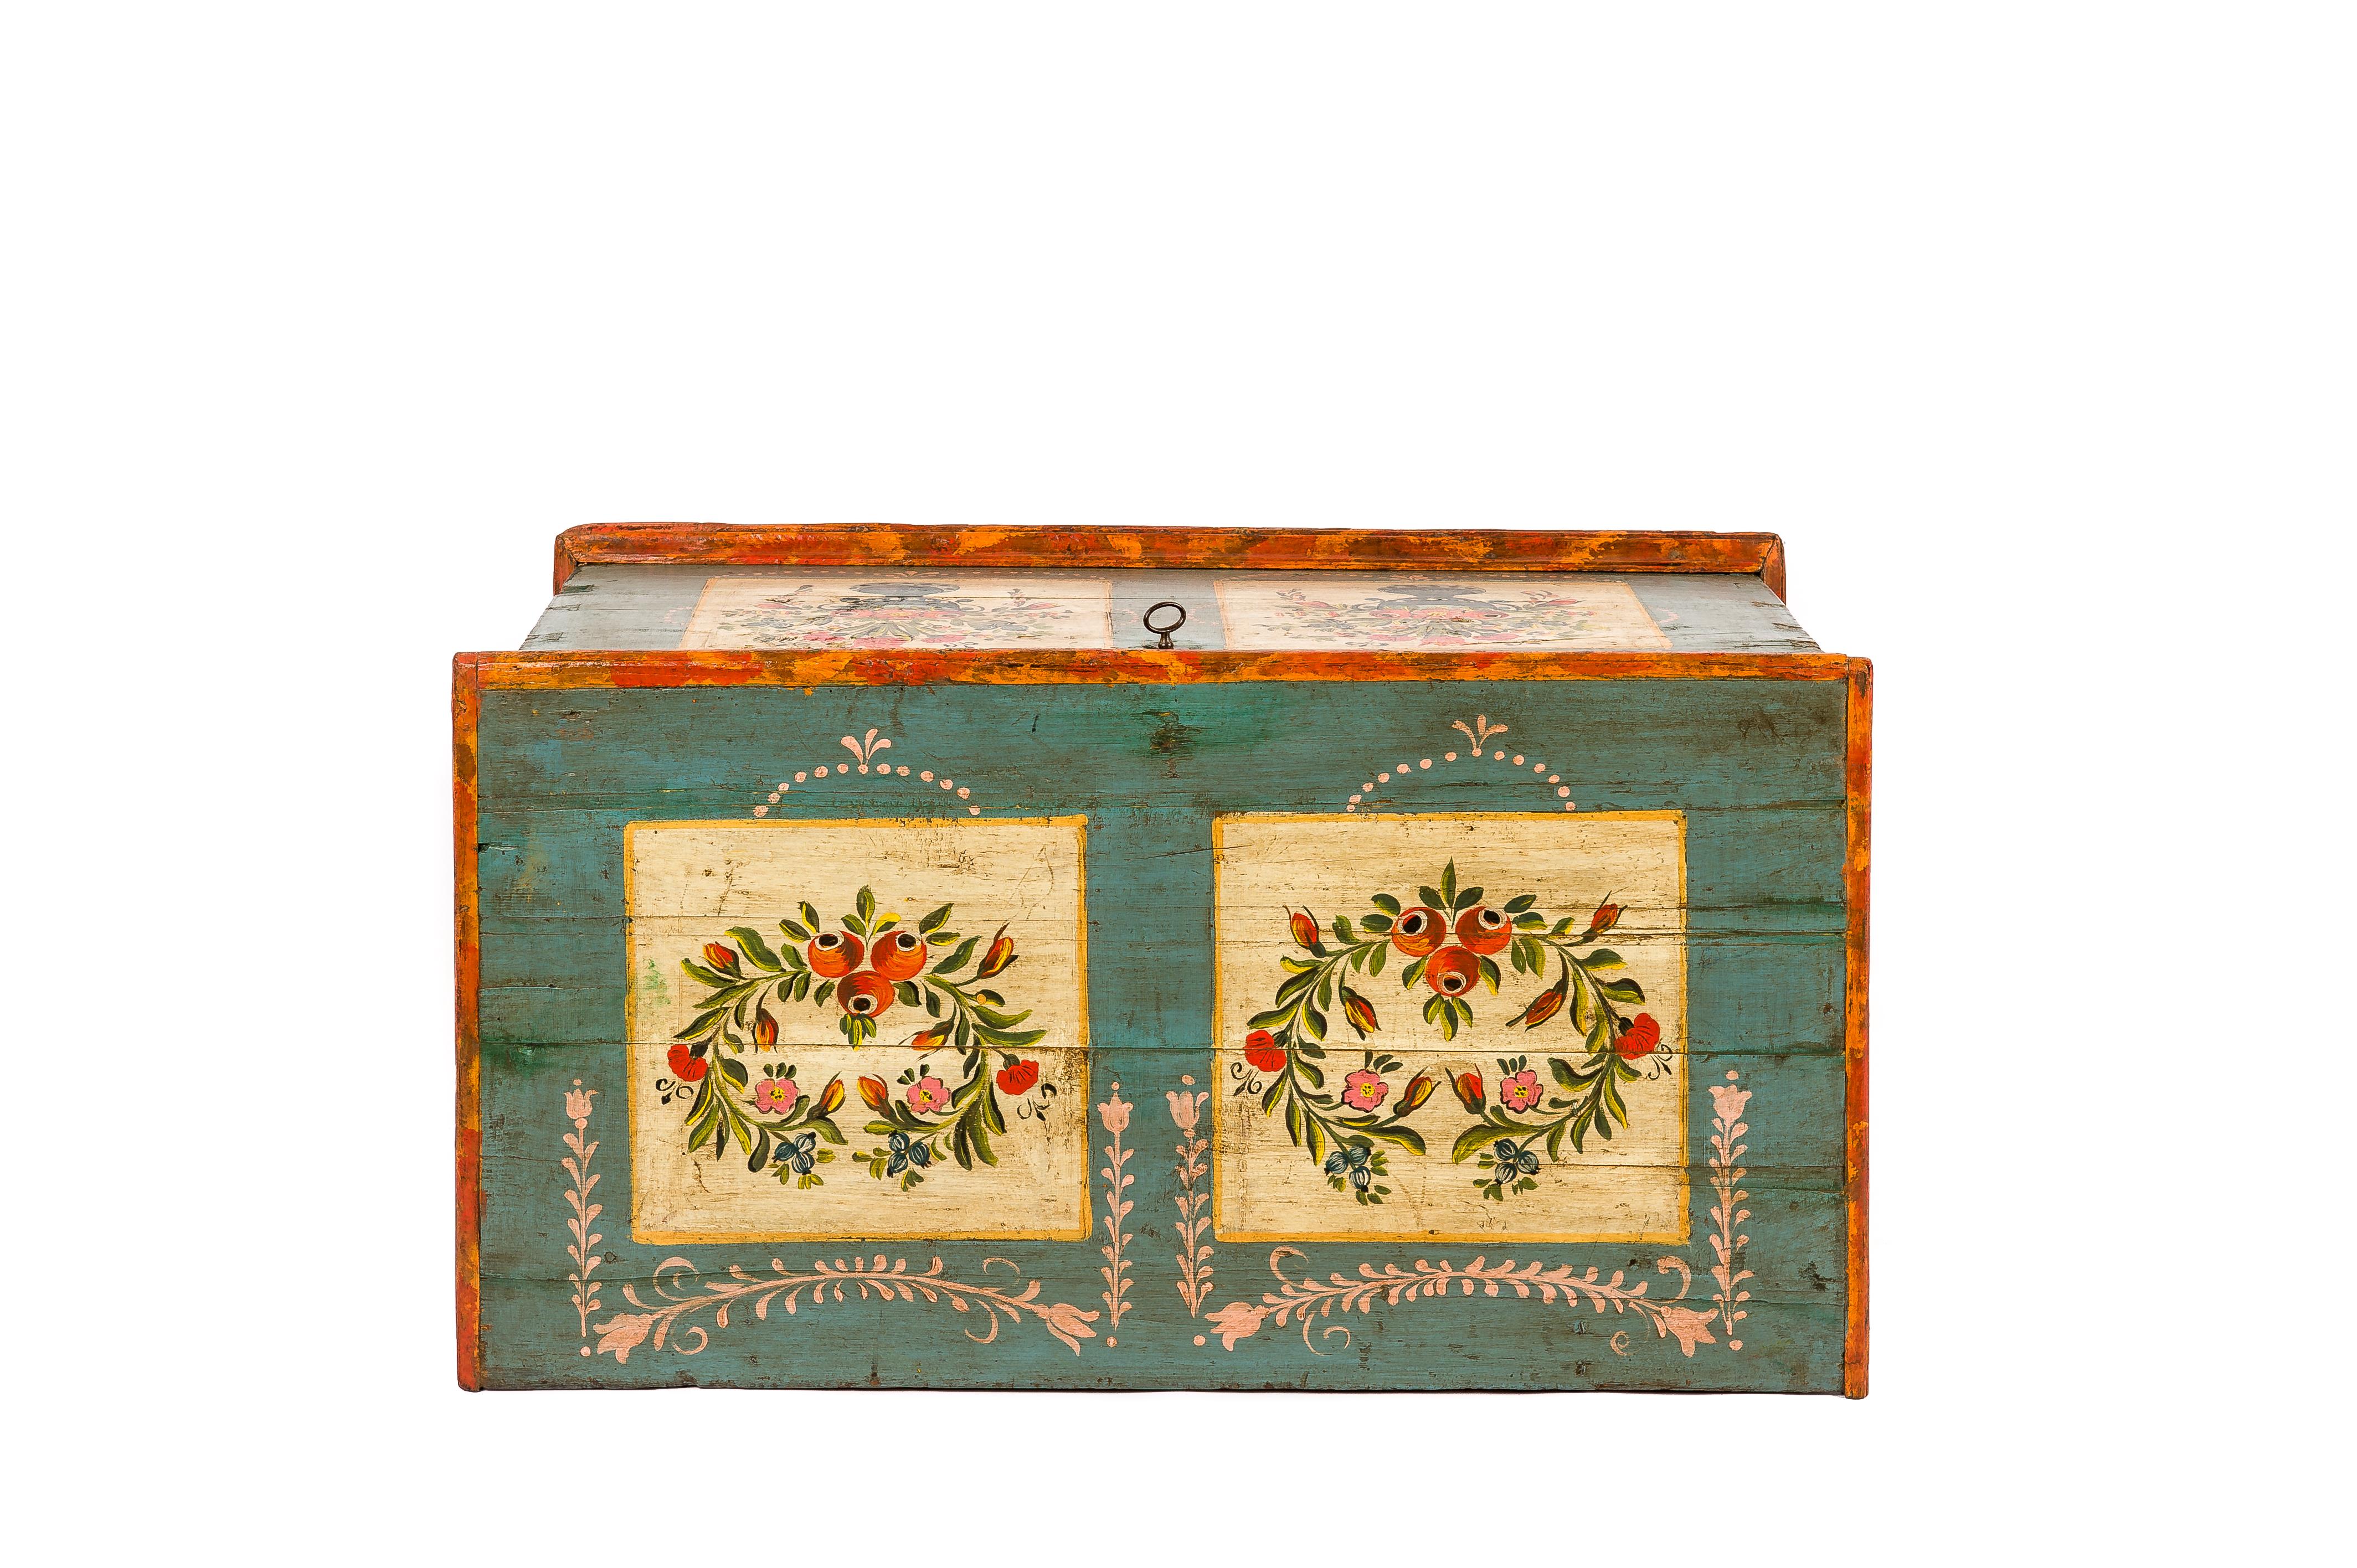 Steel Antique 19th-century solid pine and traditional painted Bohemian trunk or chest